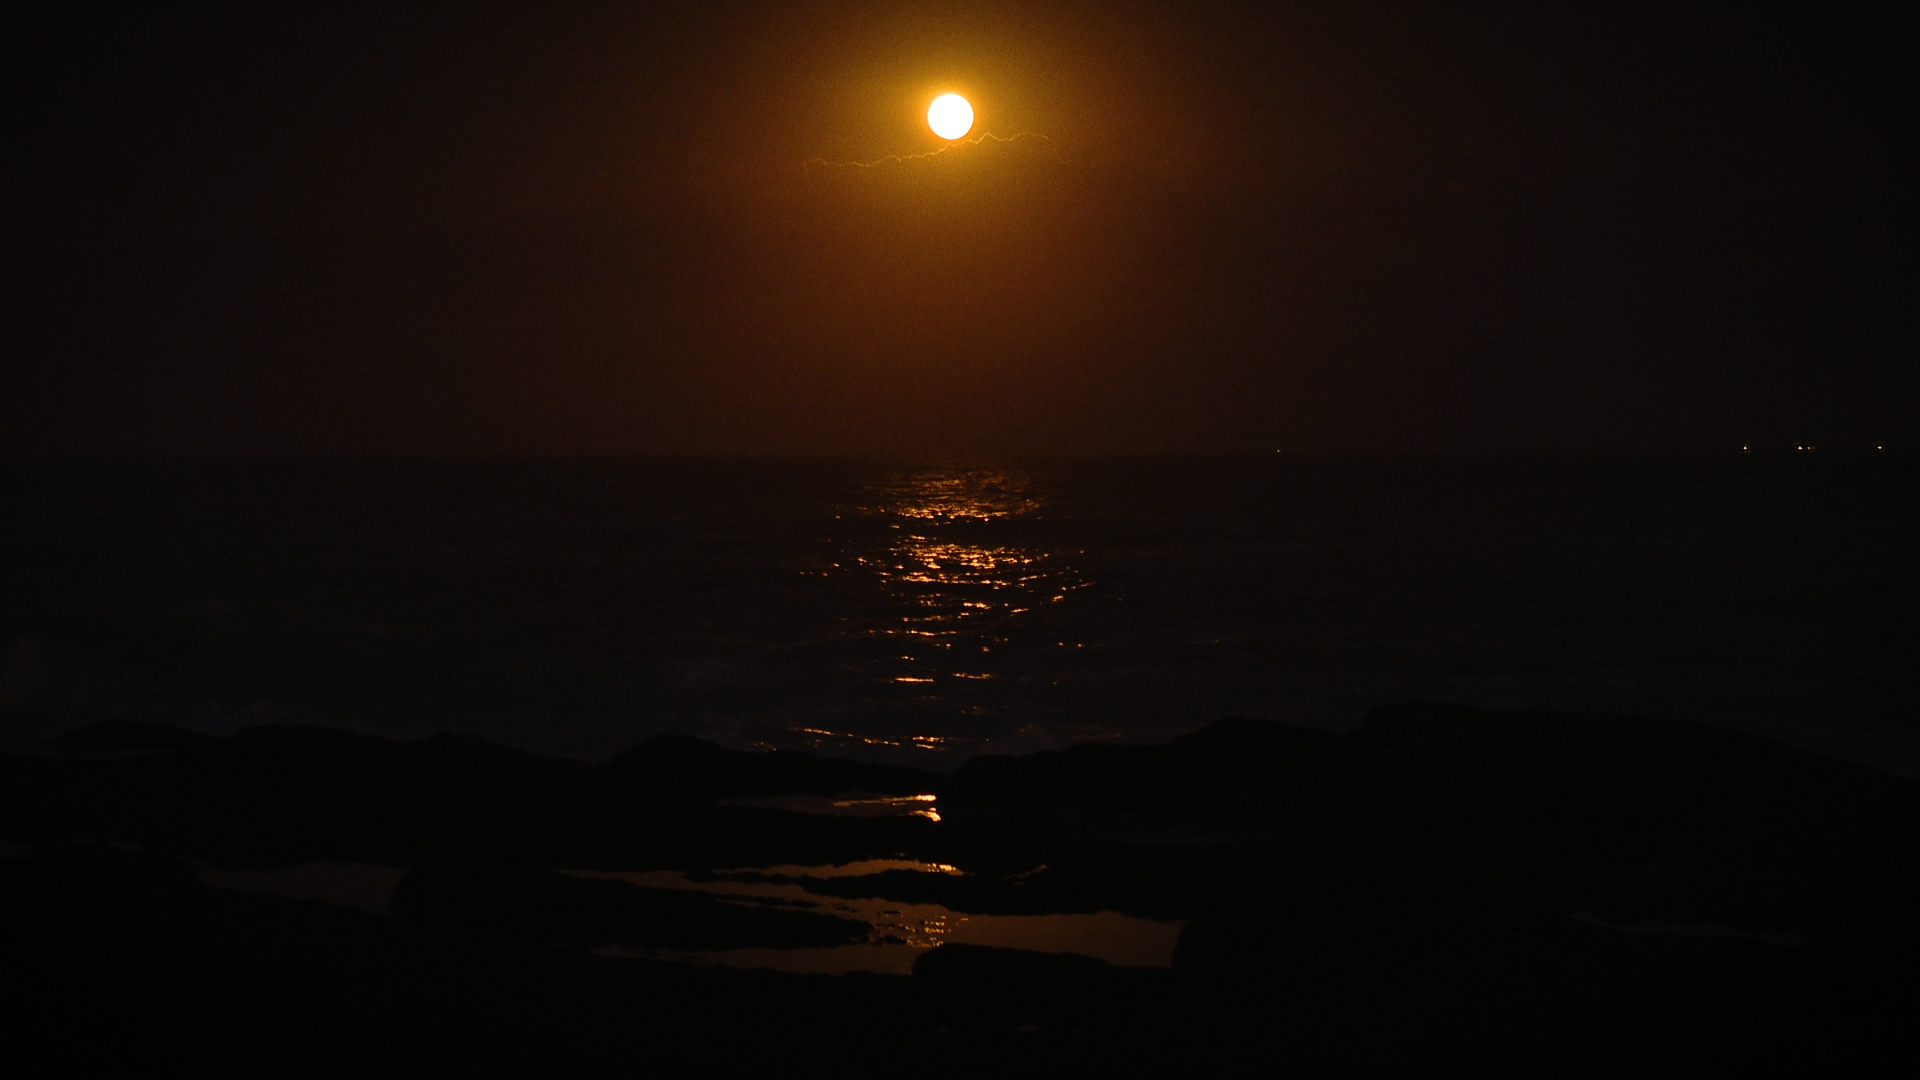 The awe inspiring sight of the Harvest Moon rising over the Atlantic Ocean.